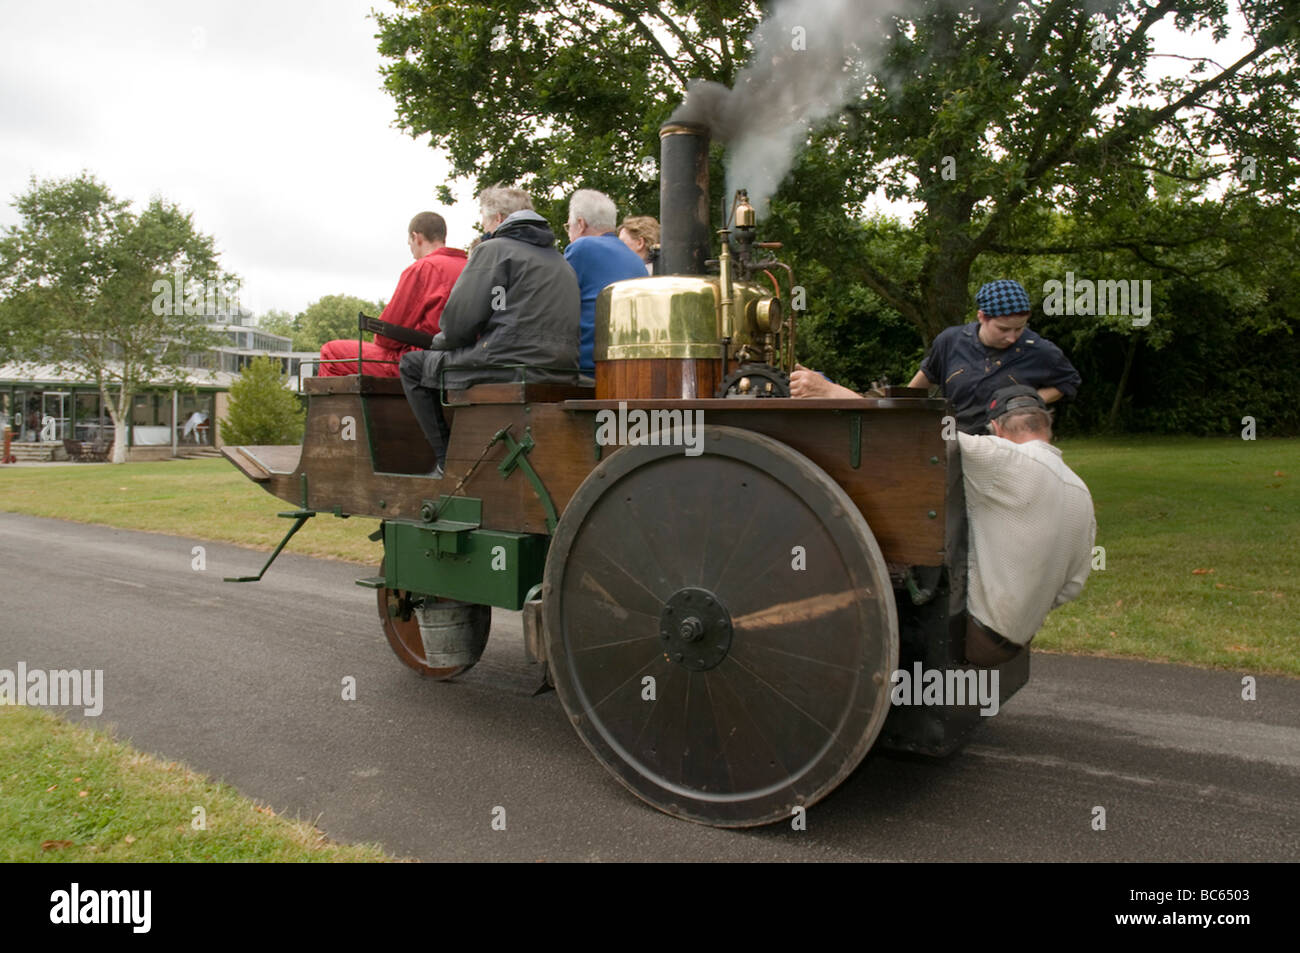 1875 Grenville Steam Carriage Stockfoto